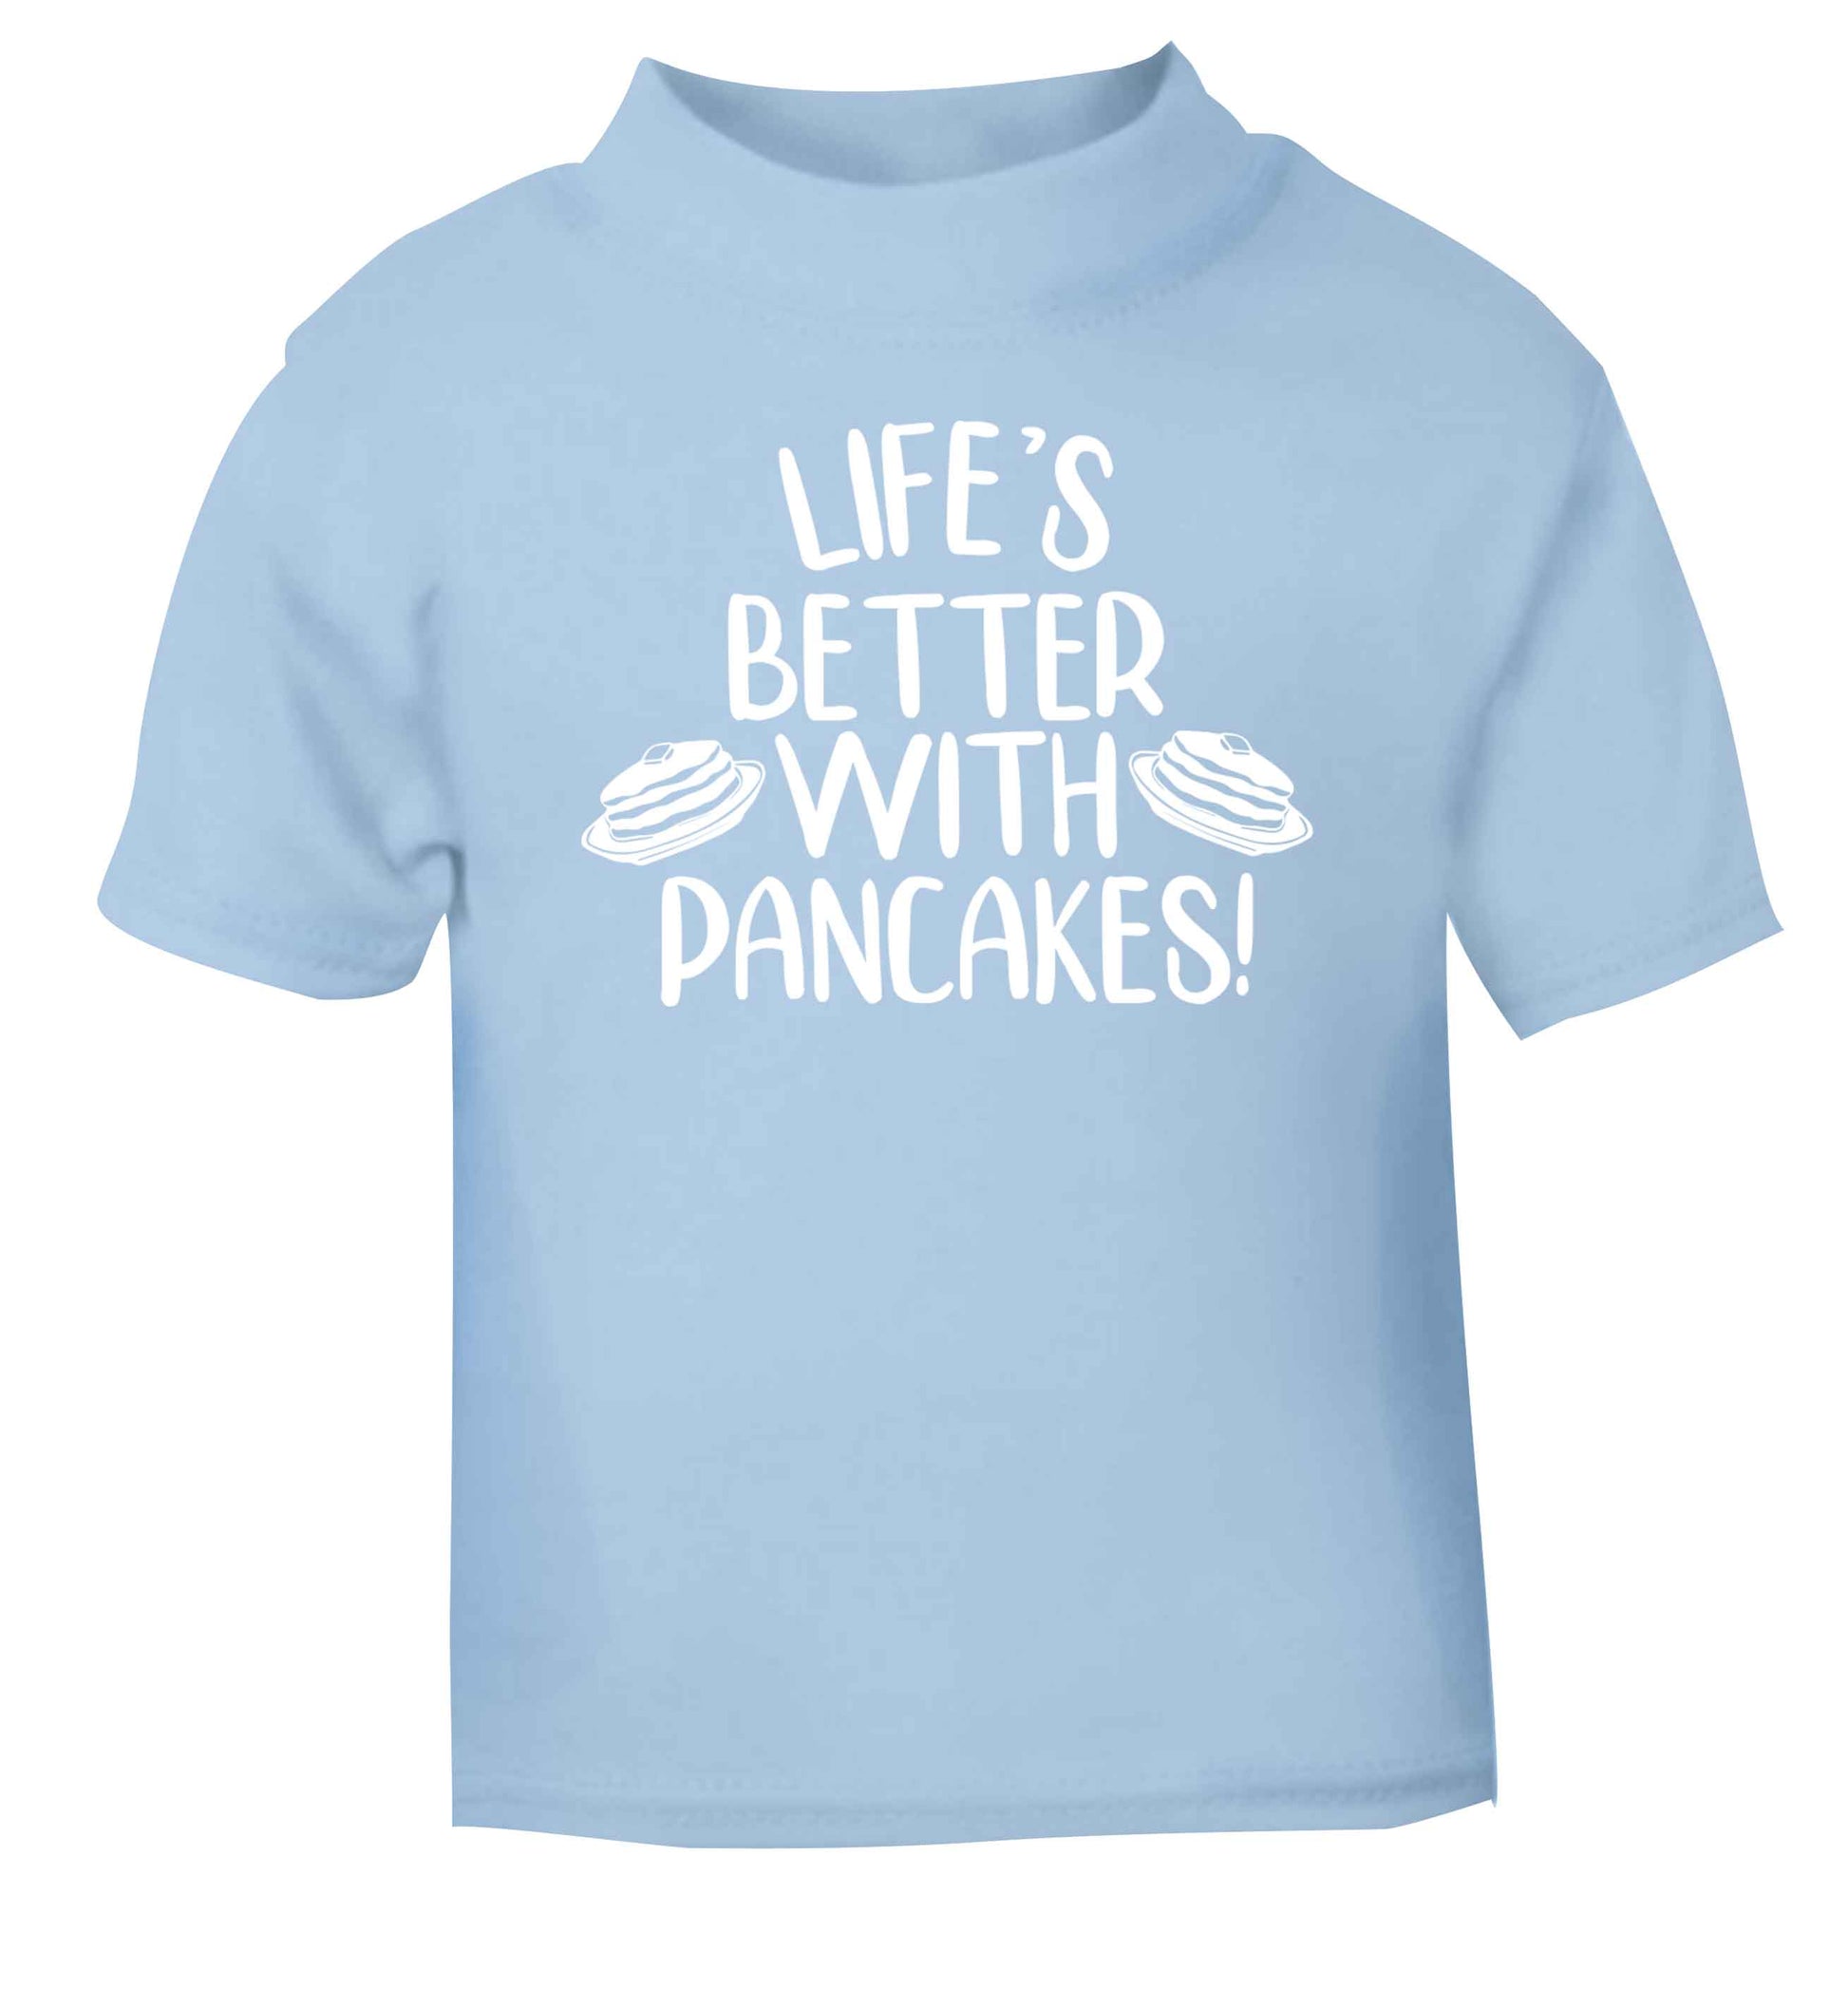 Life's better with pancakes light blue baby toddler Tshirt 2 Years